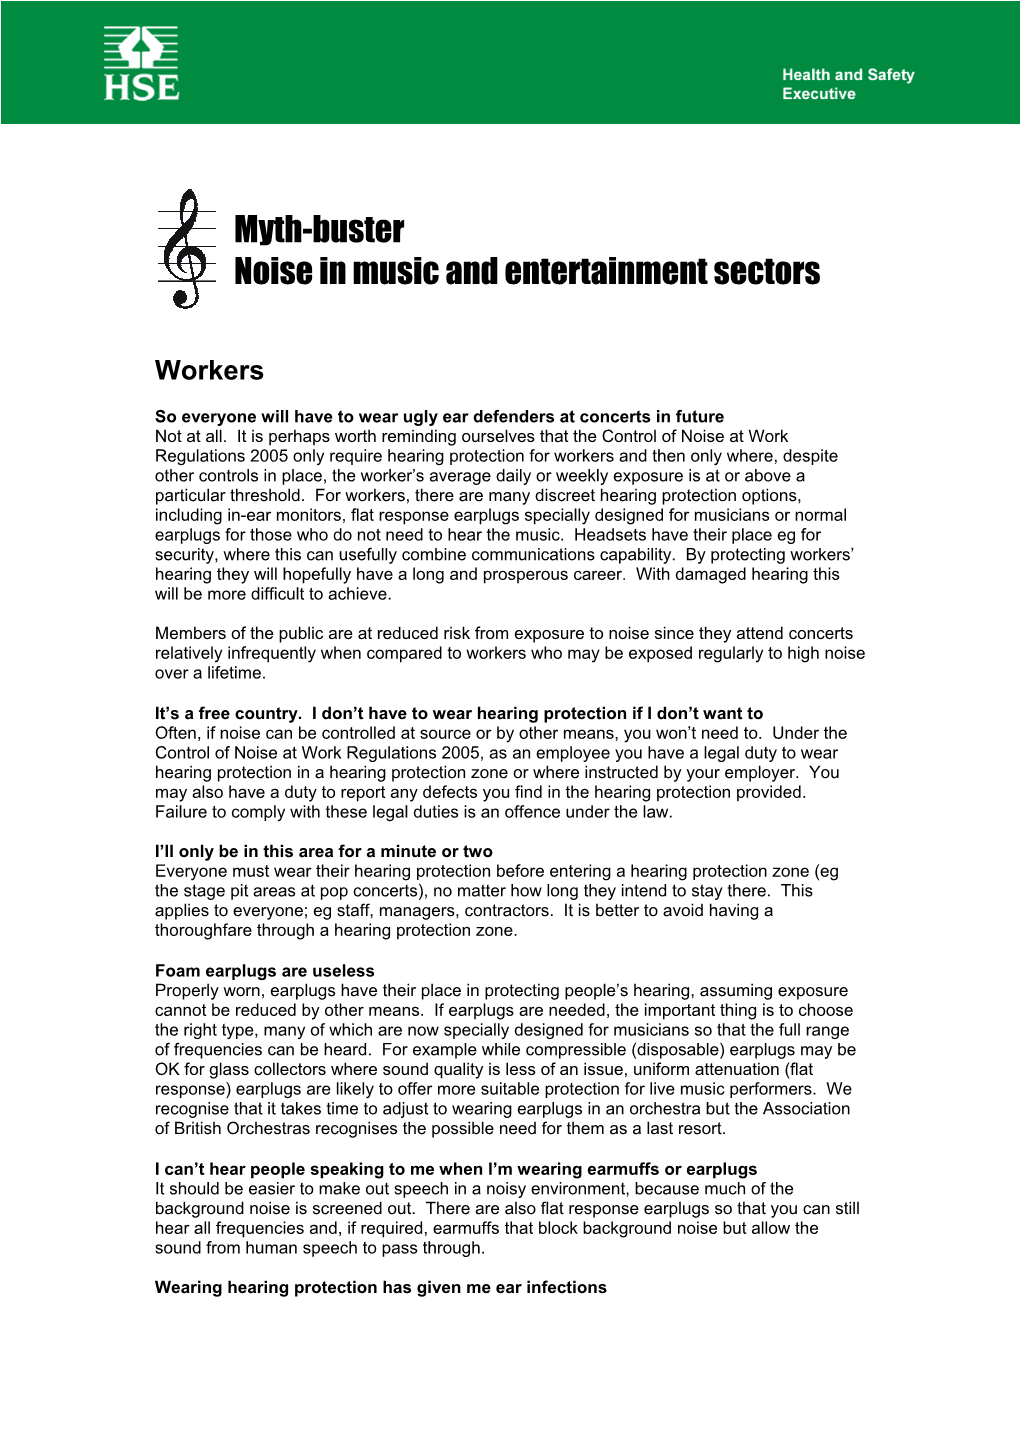 Health and Safety Executive Myth Buster Noise in Music And